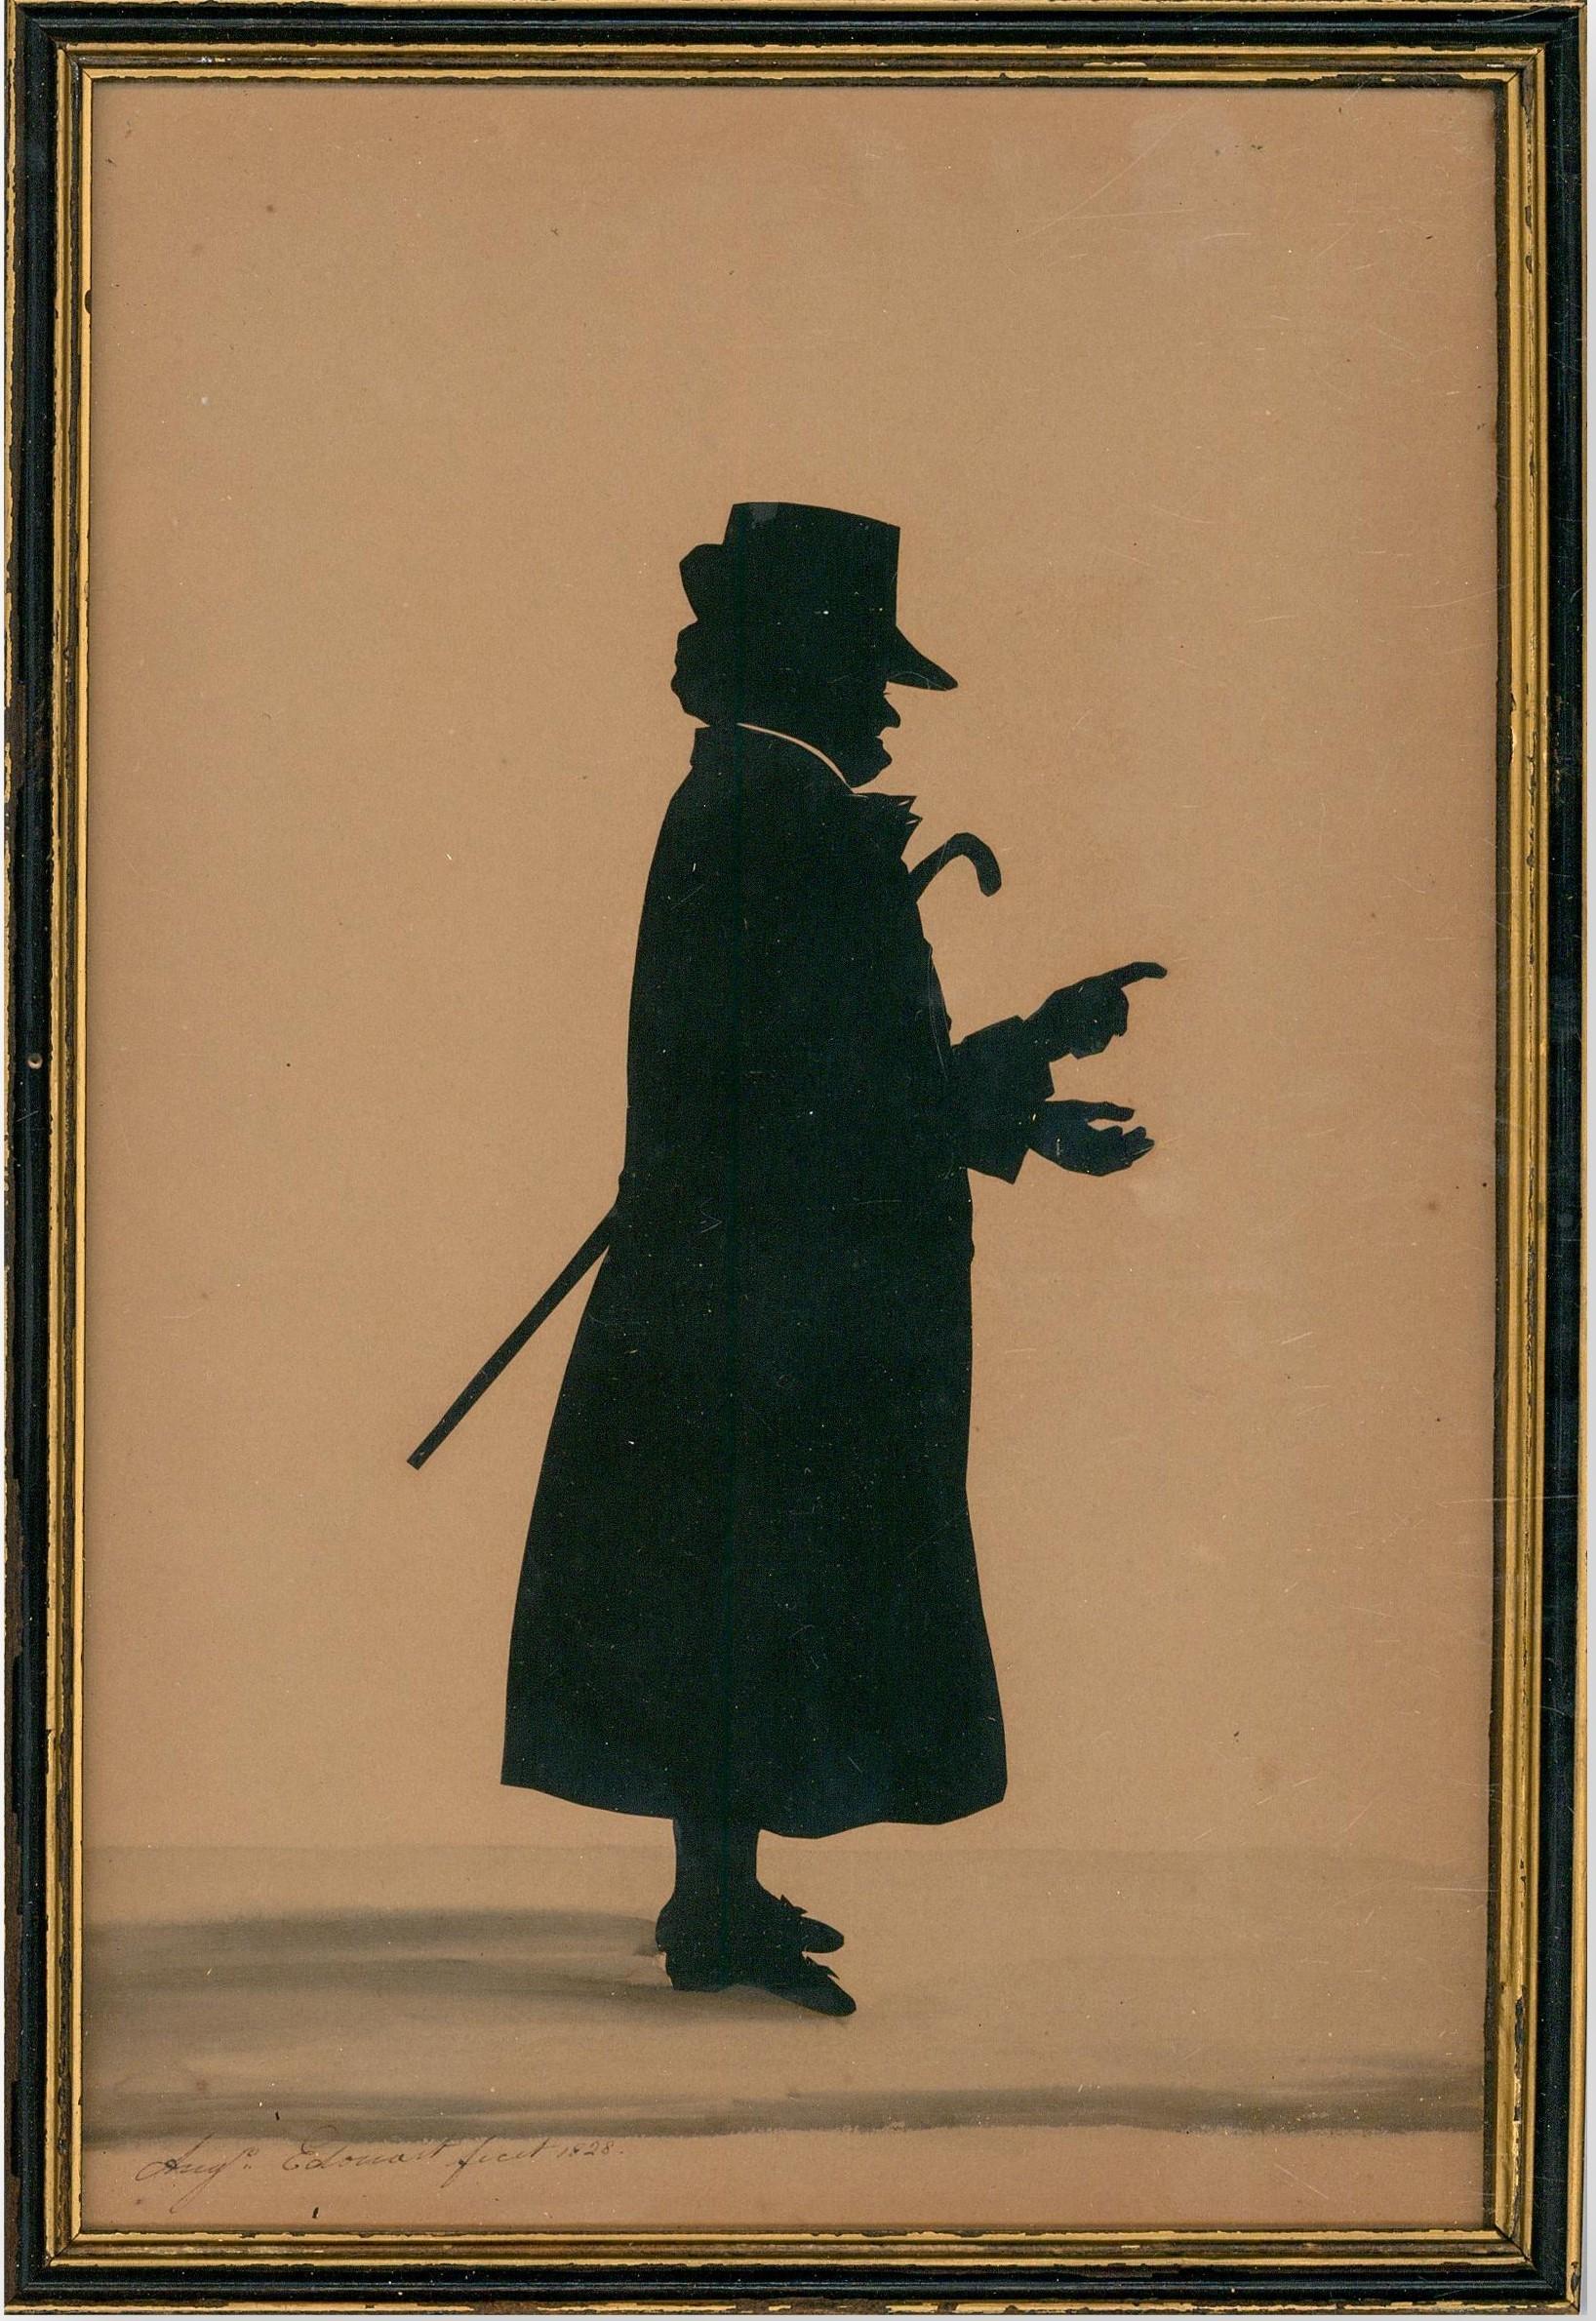 A fine late Georgian paper cut silhouette, showing a well dressed man in coat and hat with his walking stick tucked under his arm. The artist has signed and dated to the lower left corner. The artwork has been presented in a 20th Century gilt and